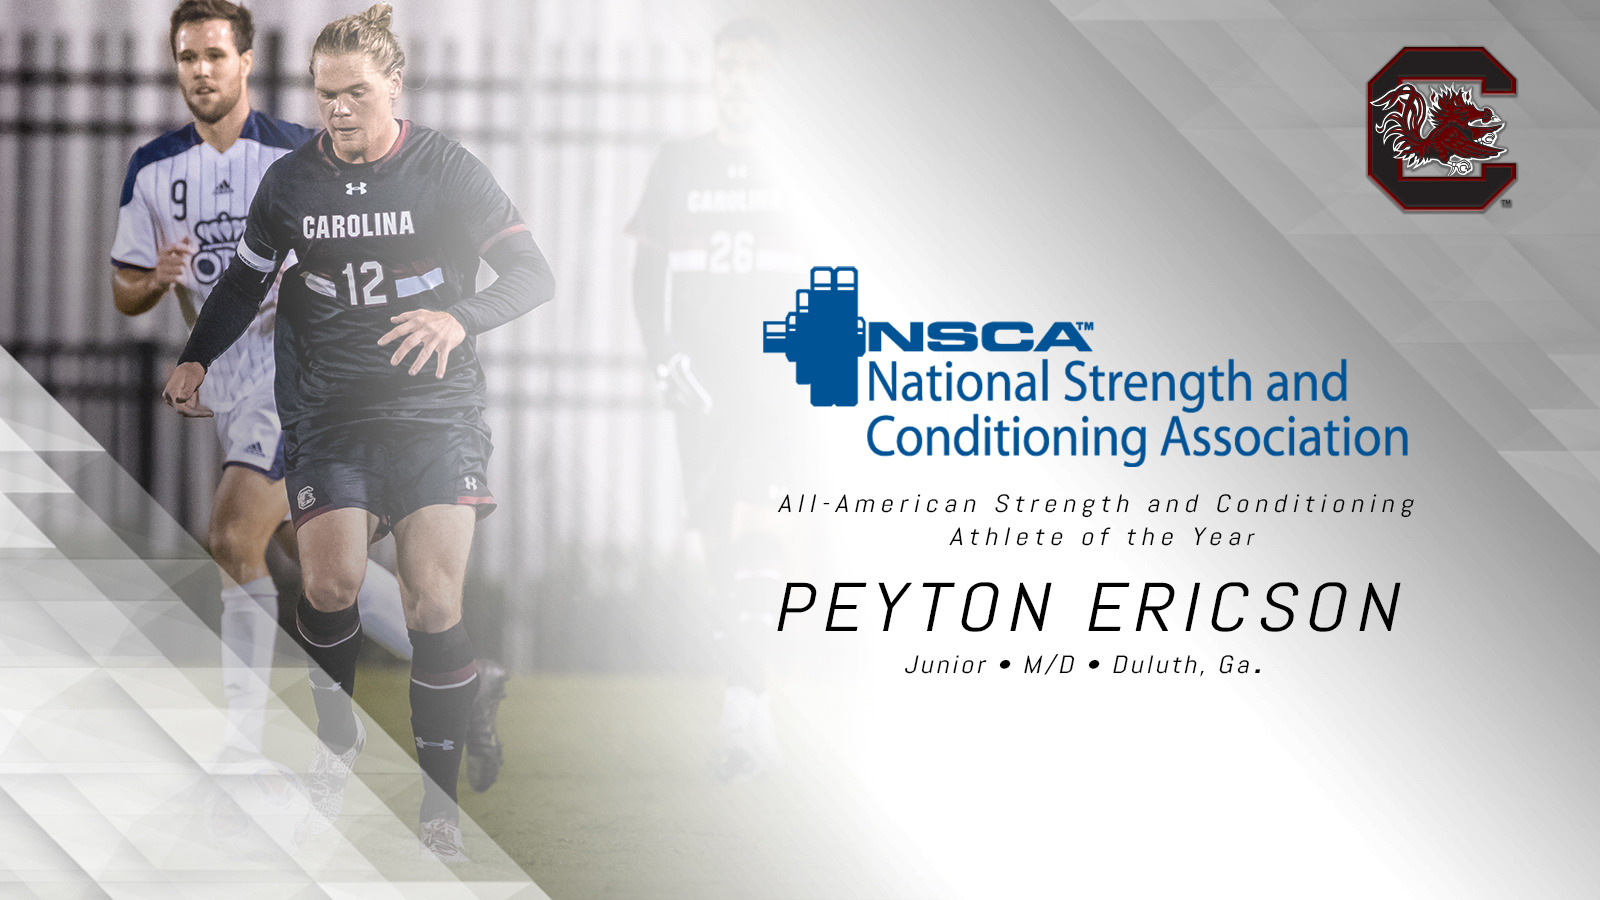 Ericson named All-American Athlete of the Year by NSCA